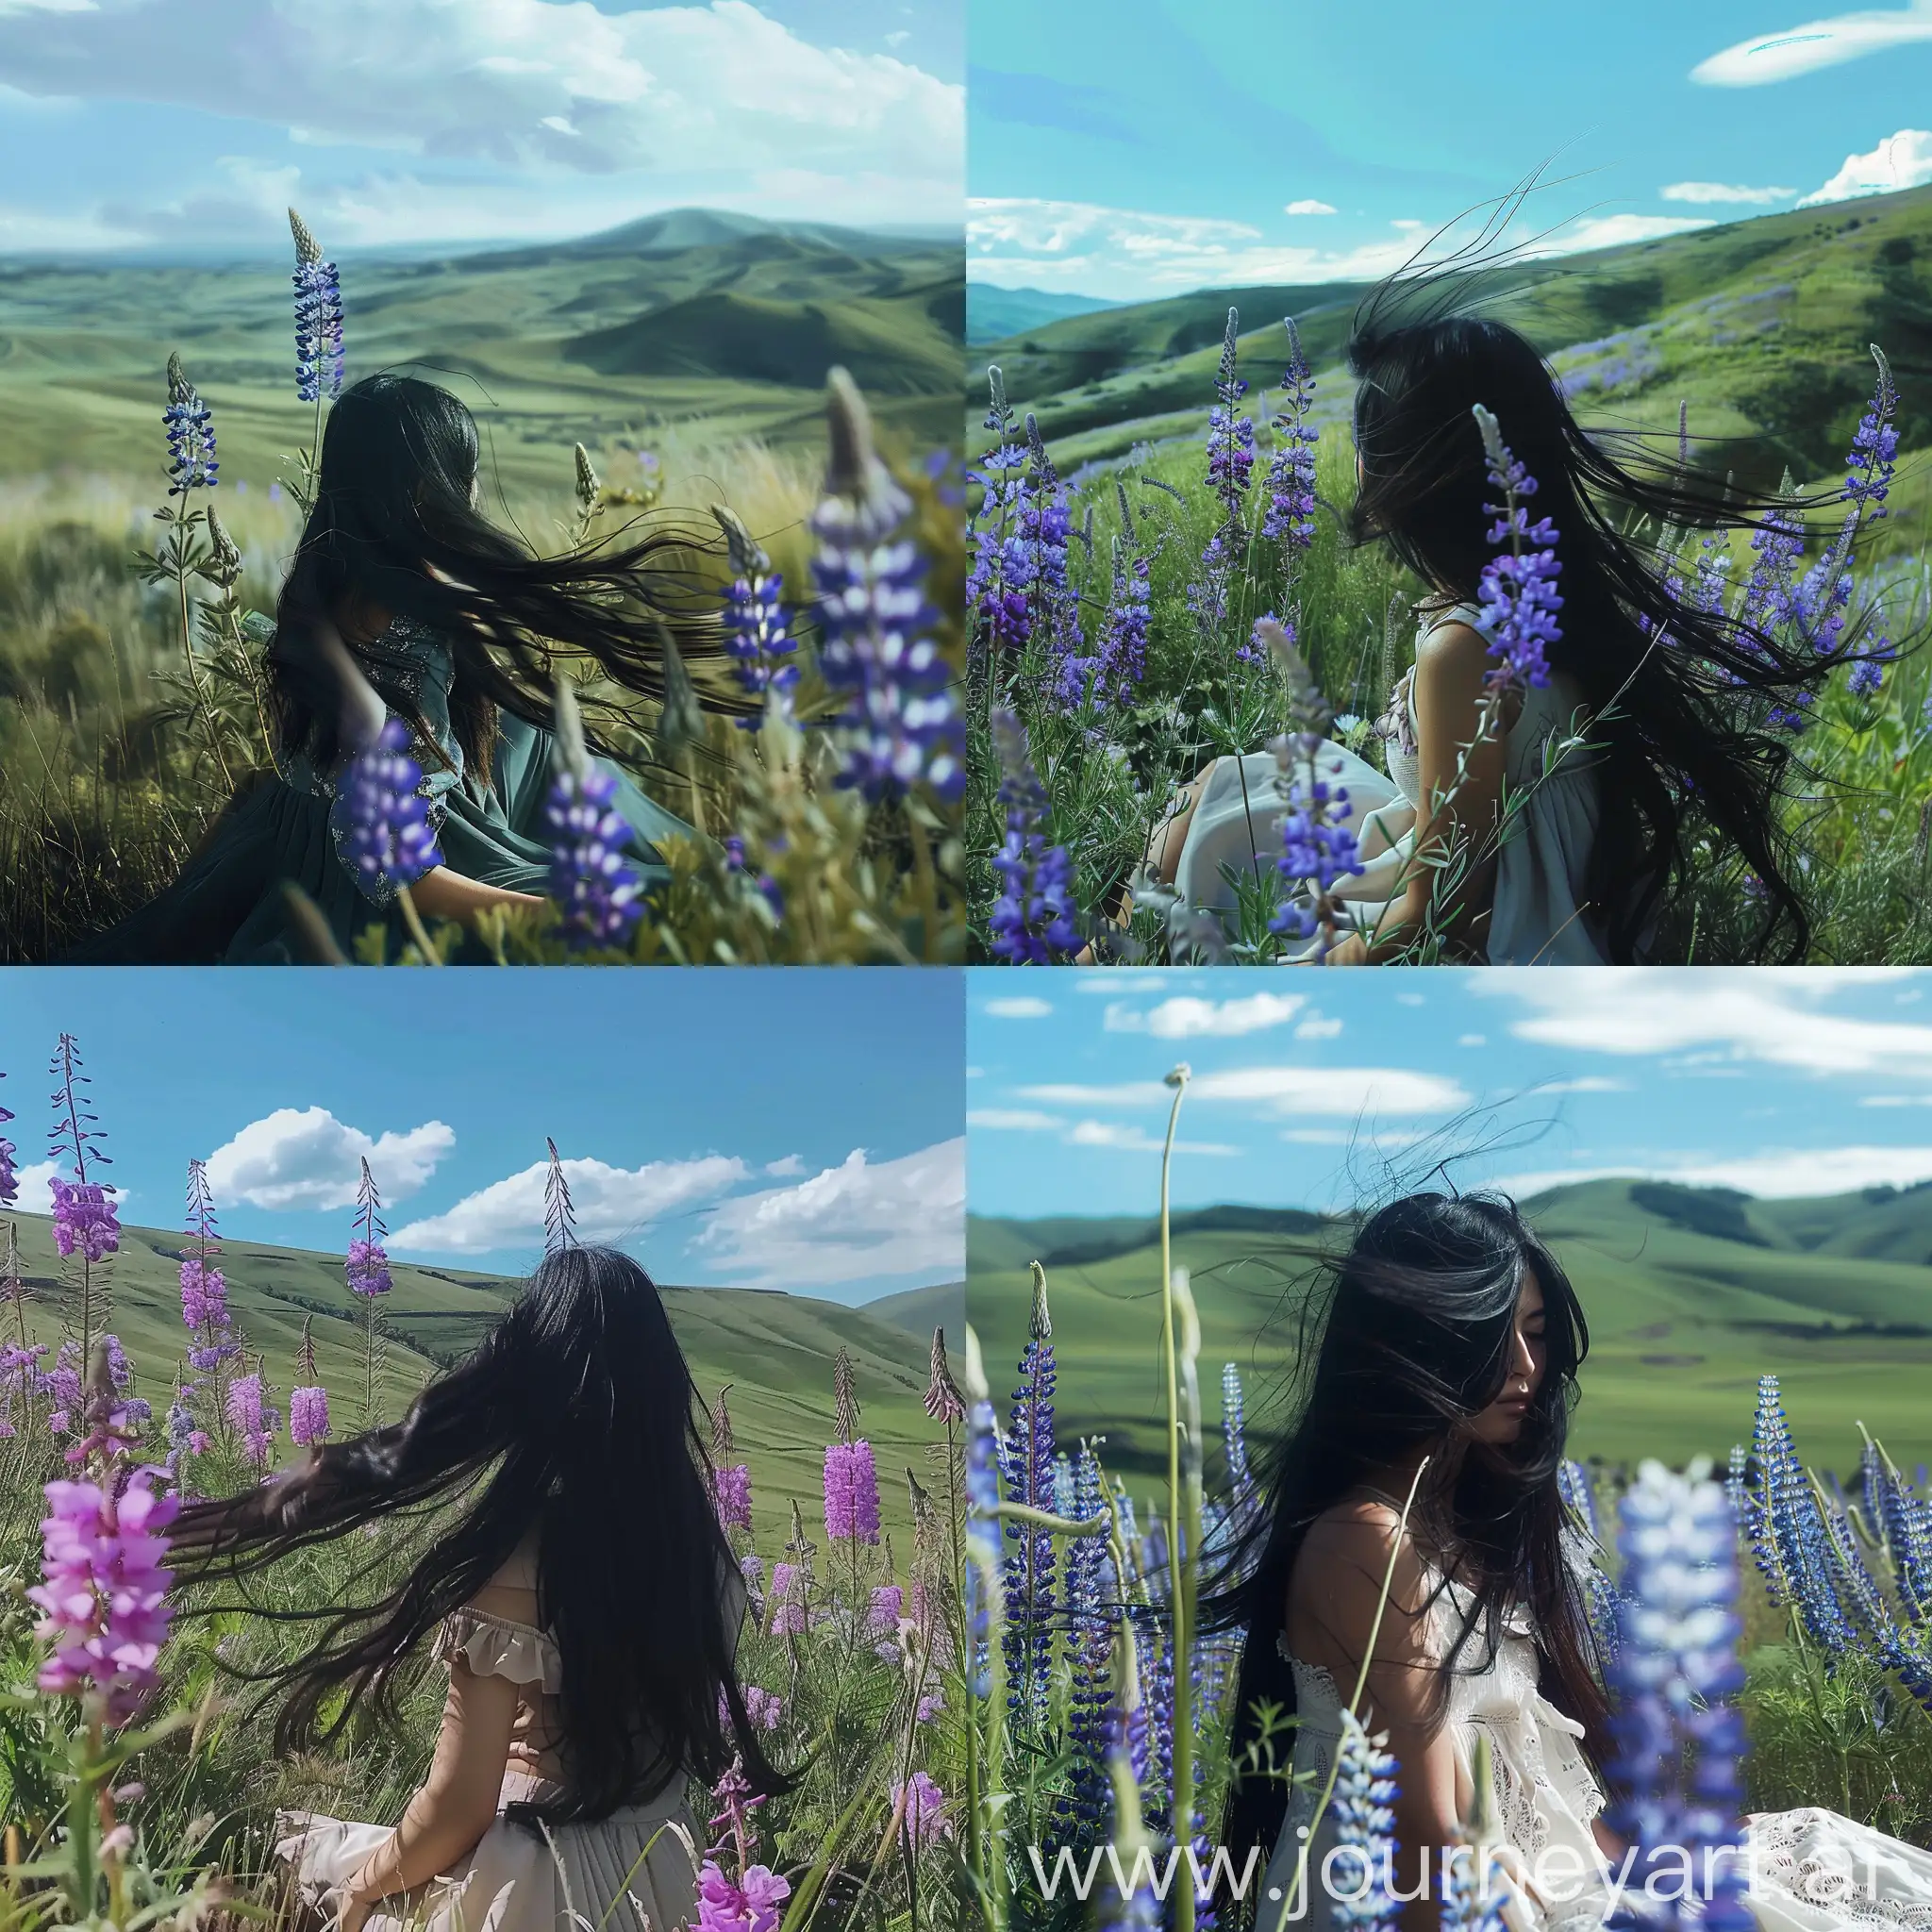 Serene-Girl-with-Long-Black-Hair-Surrounded-by-Purple-Flowers-and-Green-Hills